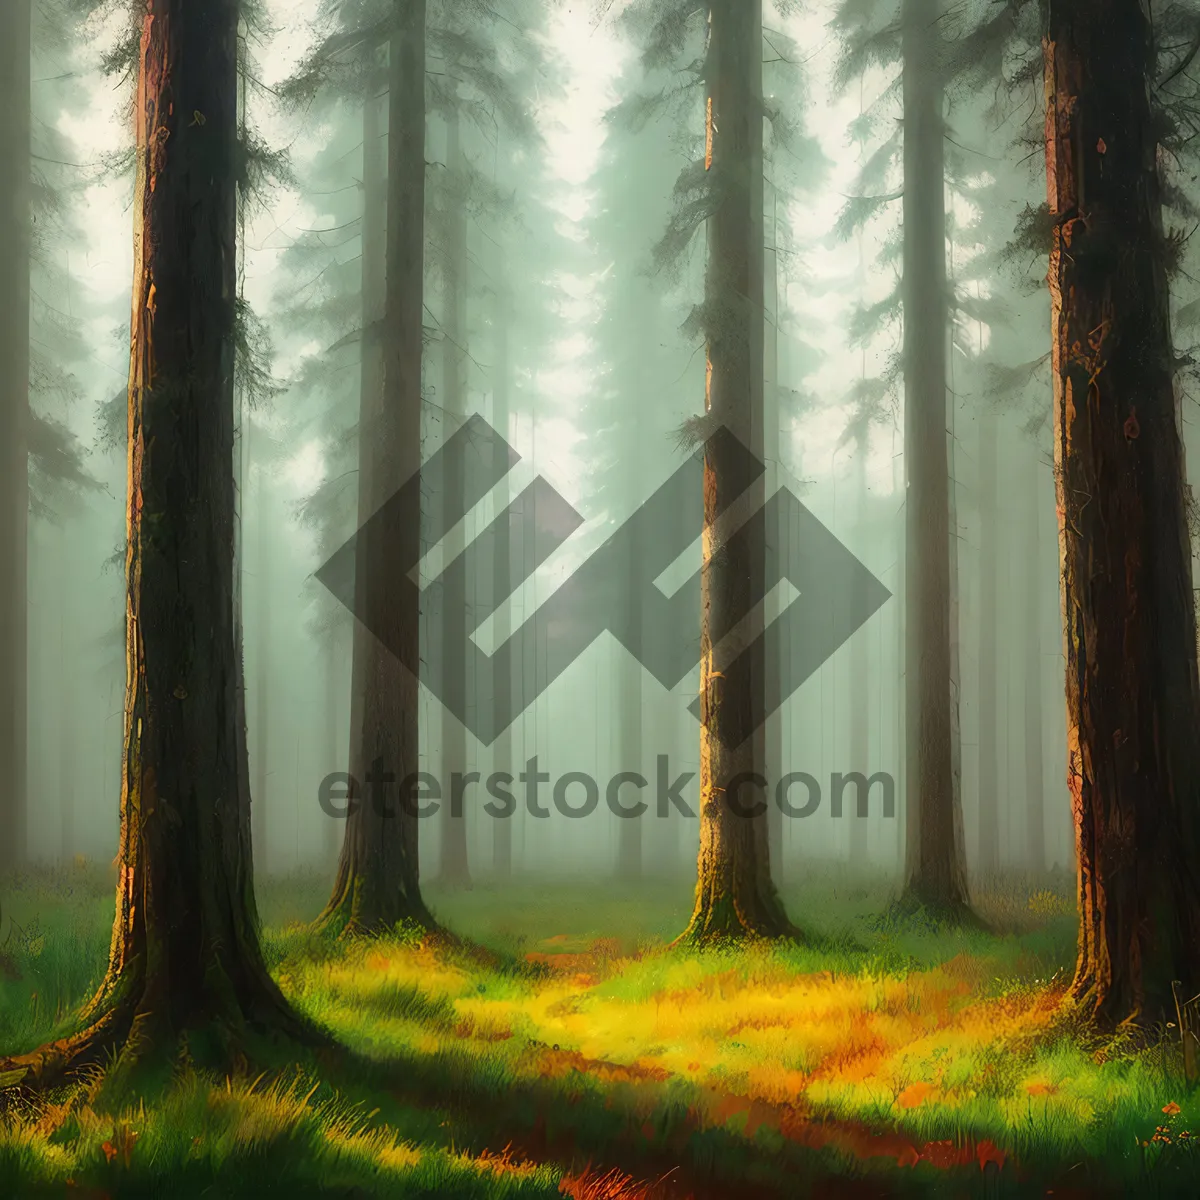 Picture of Misty Autumn Morning in a Tranquil Forest